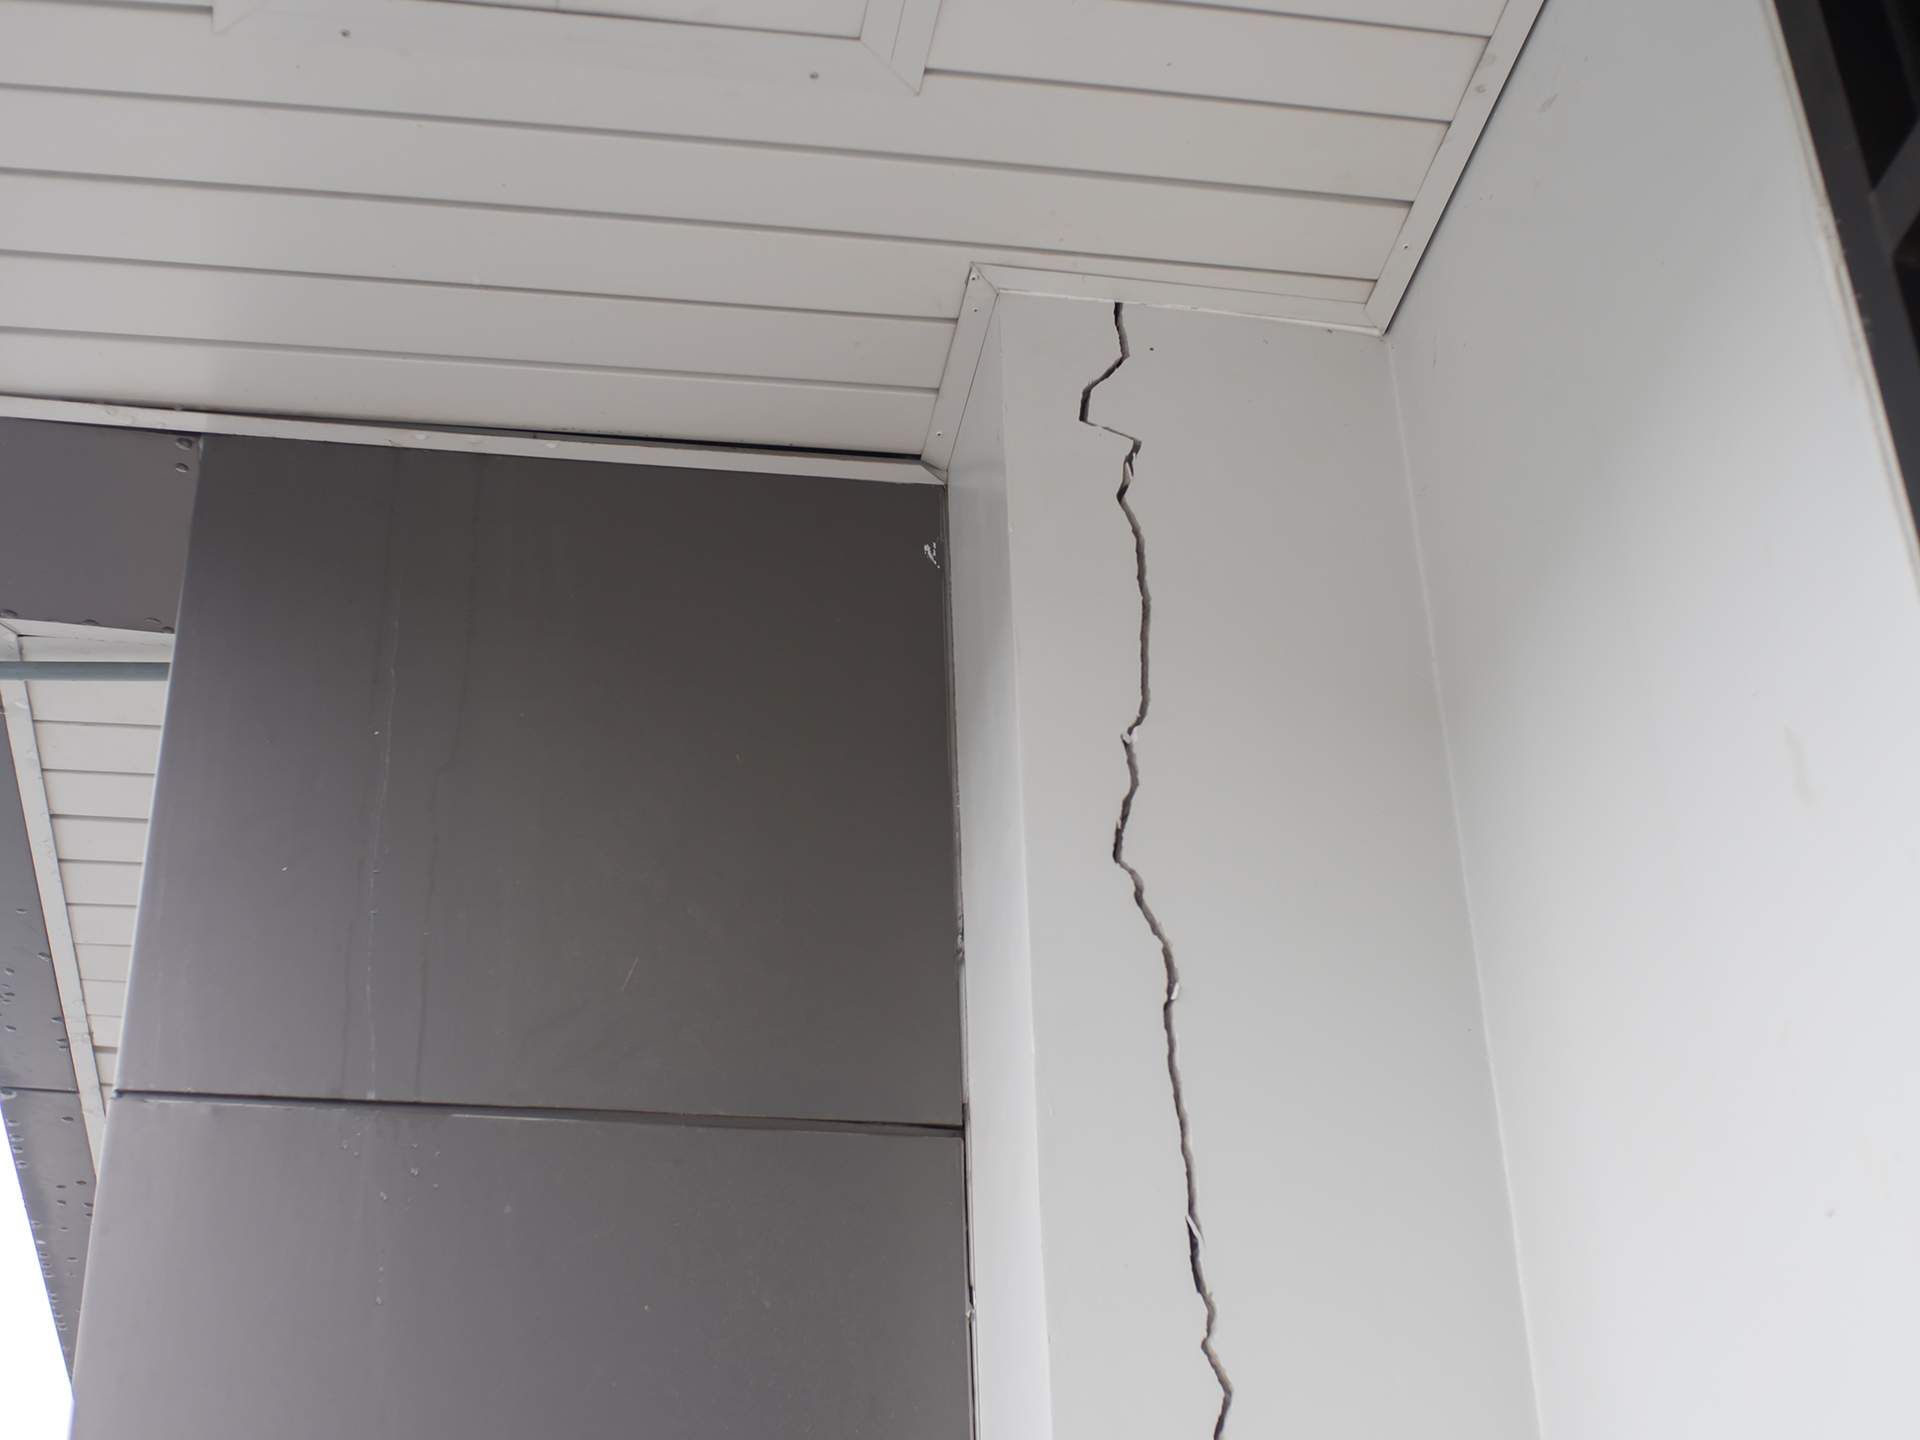 Crack in the wall of a home